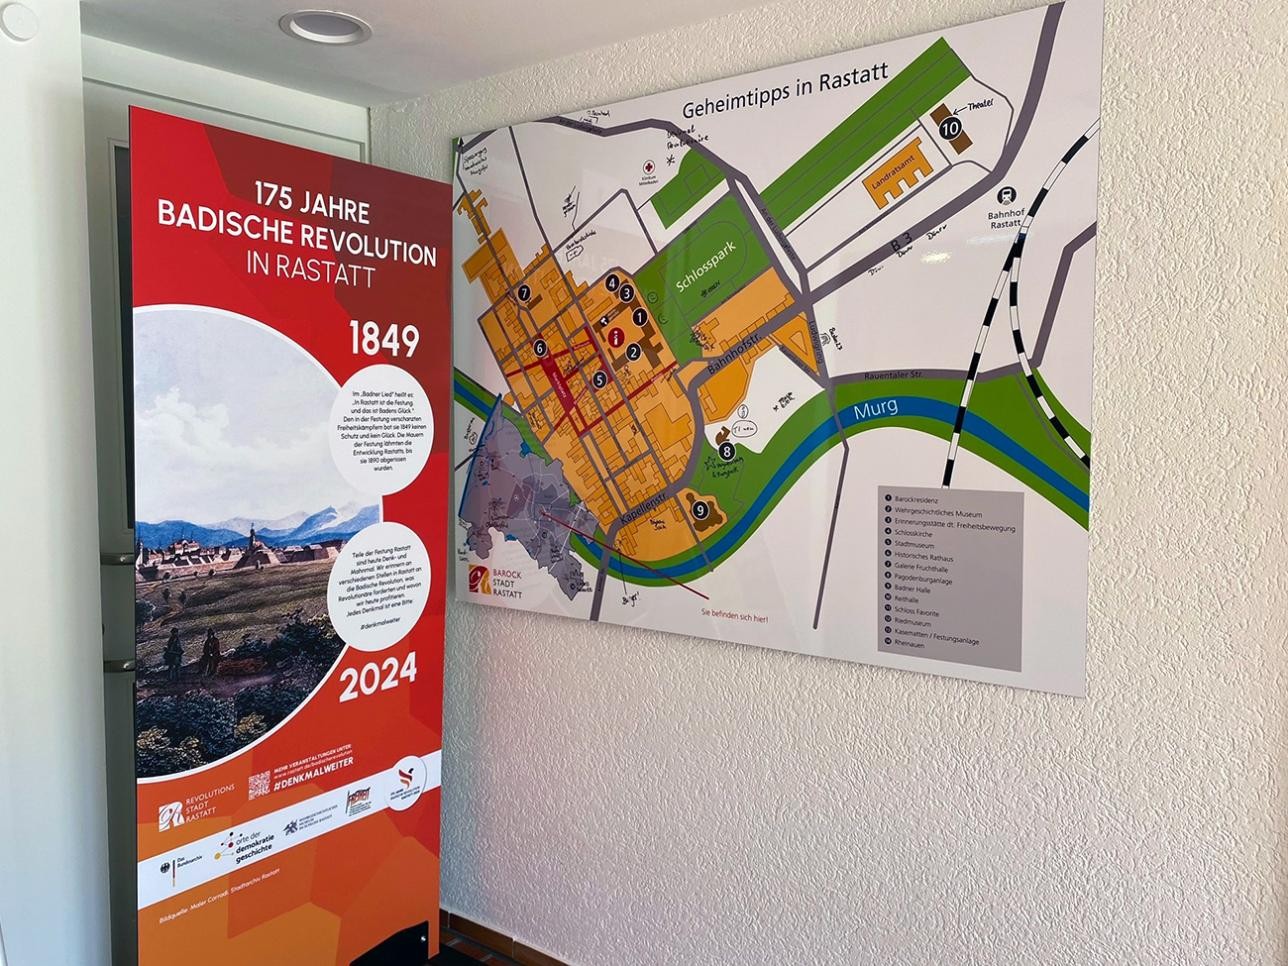 Information board in the tourist information center on 175 years of the Baden Revolution